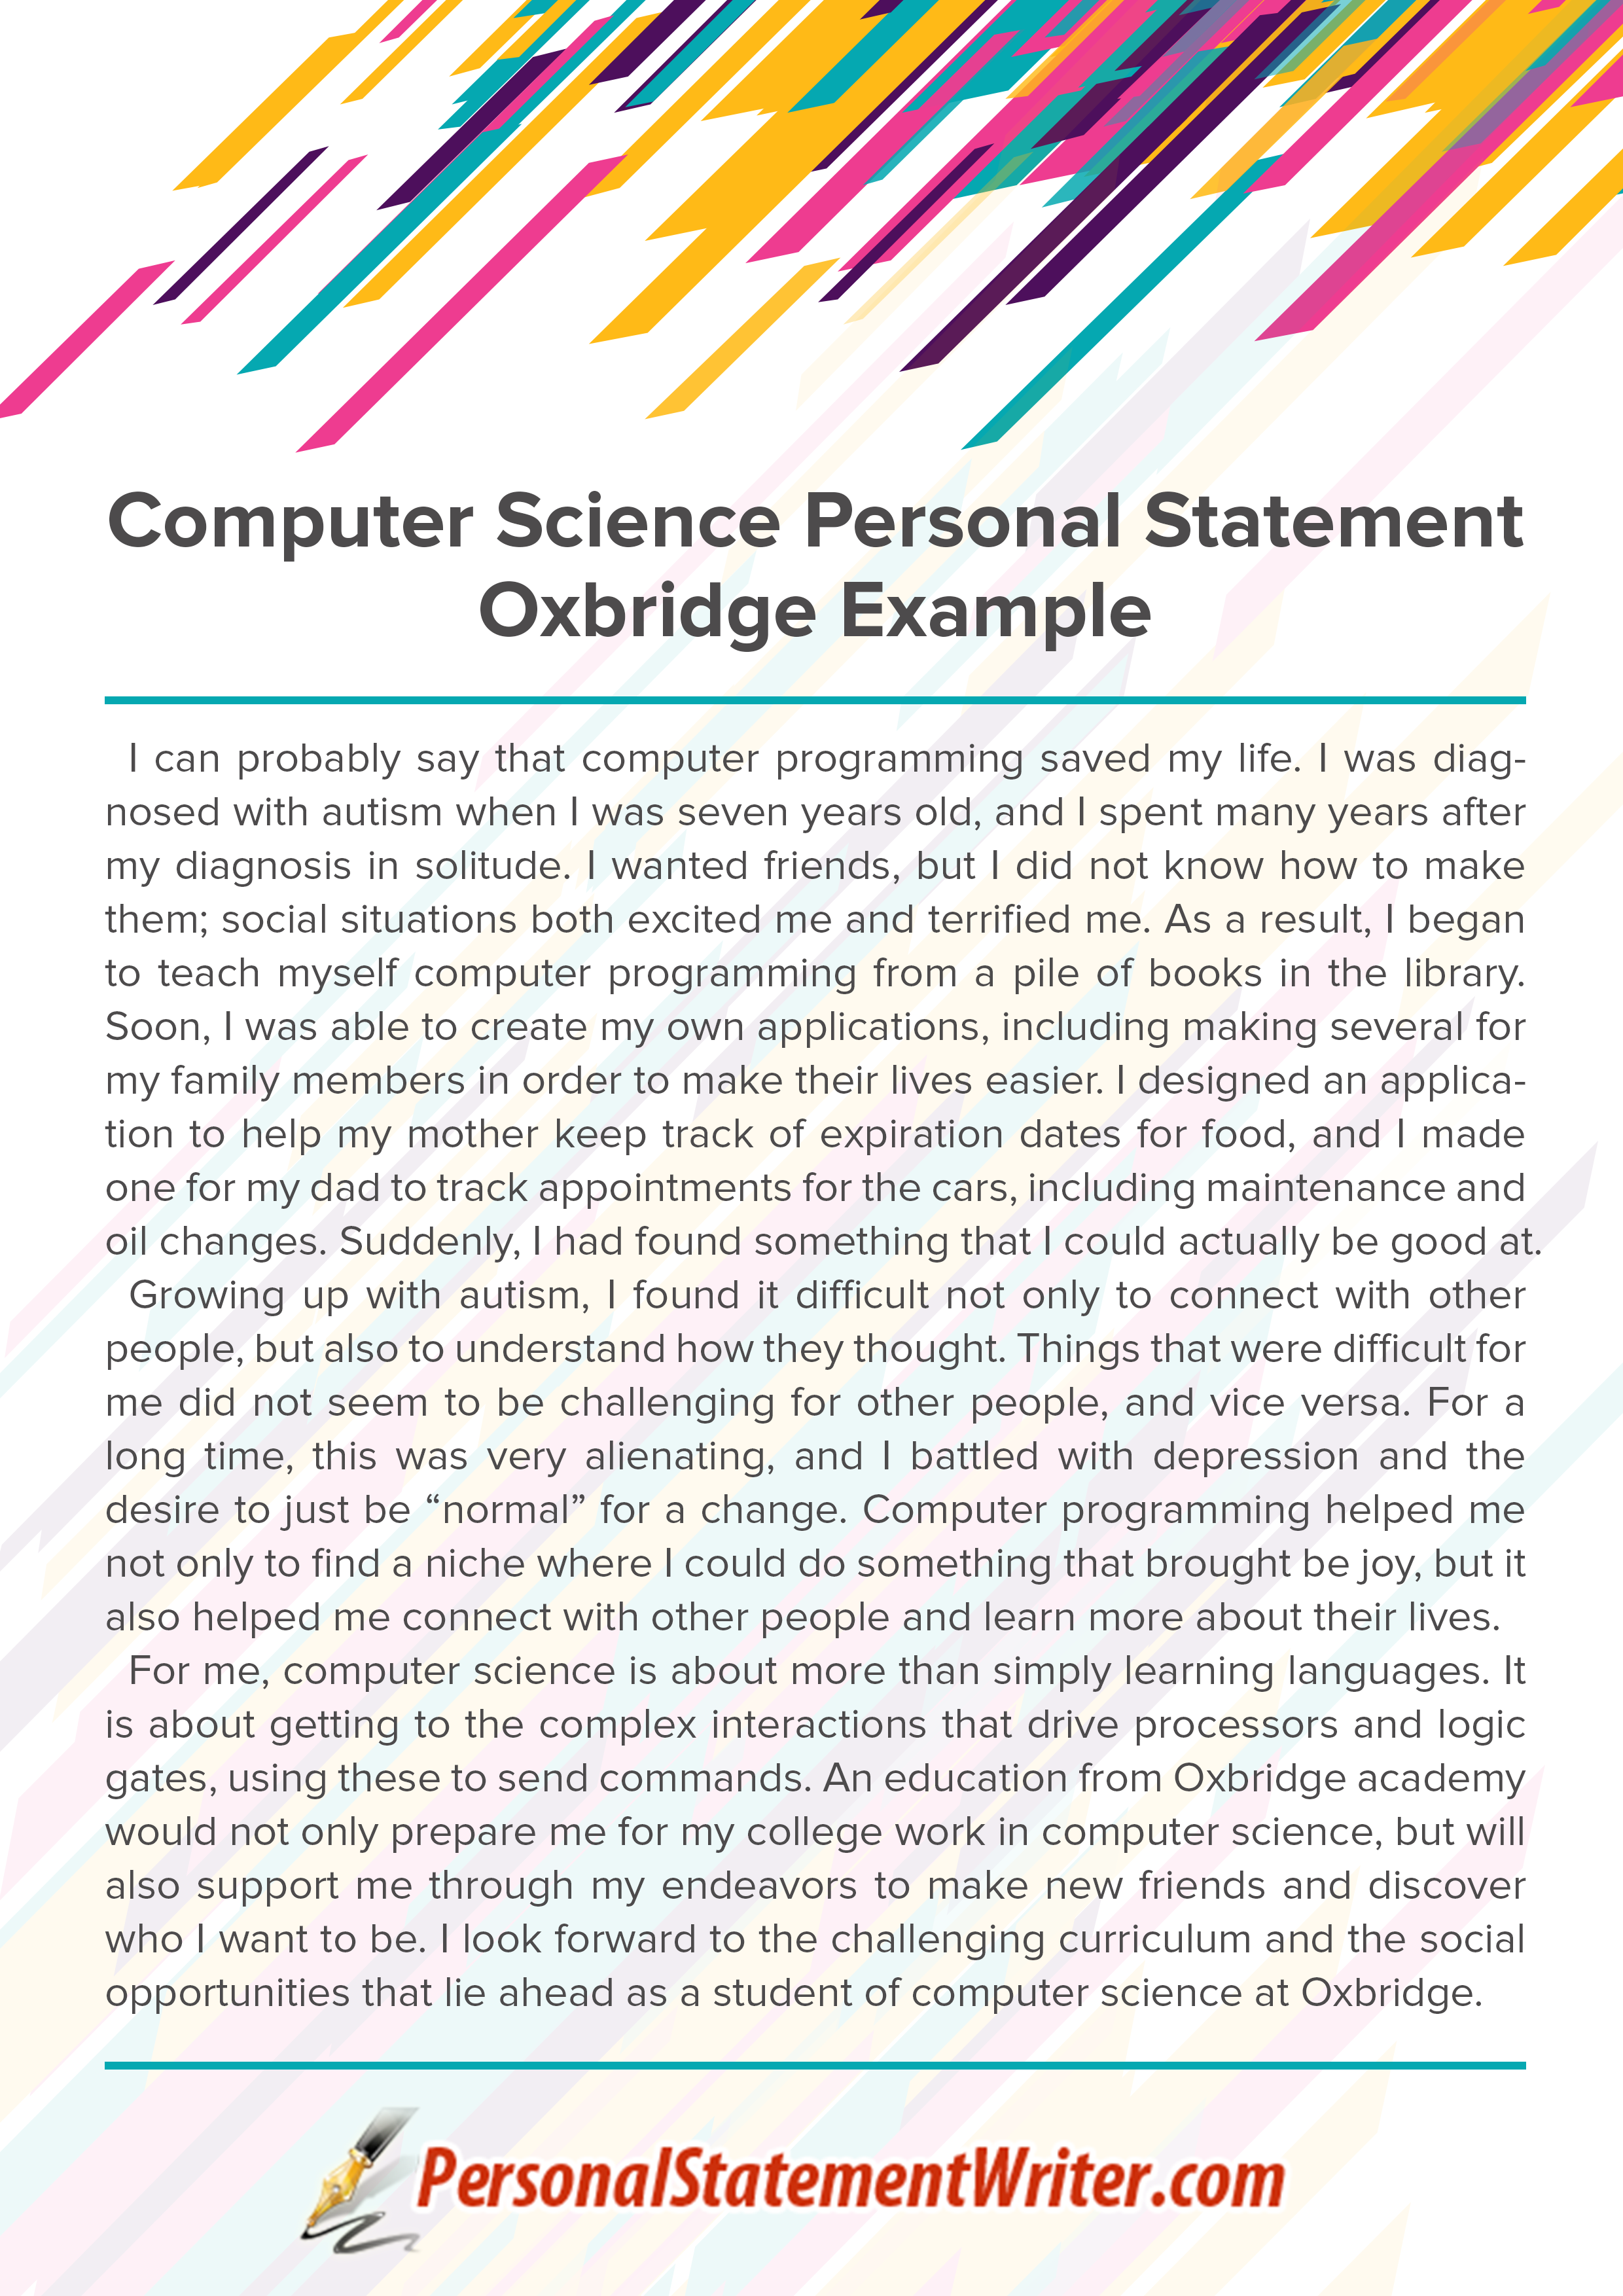 personal statement university computer science